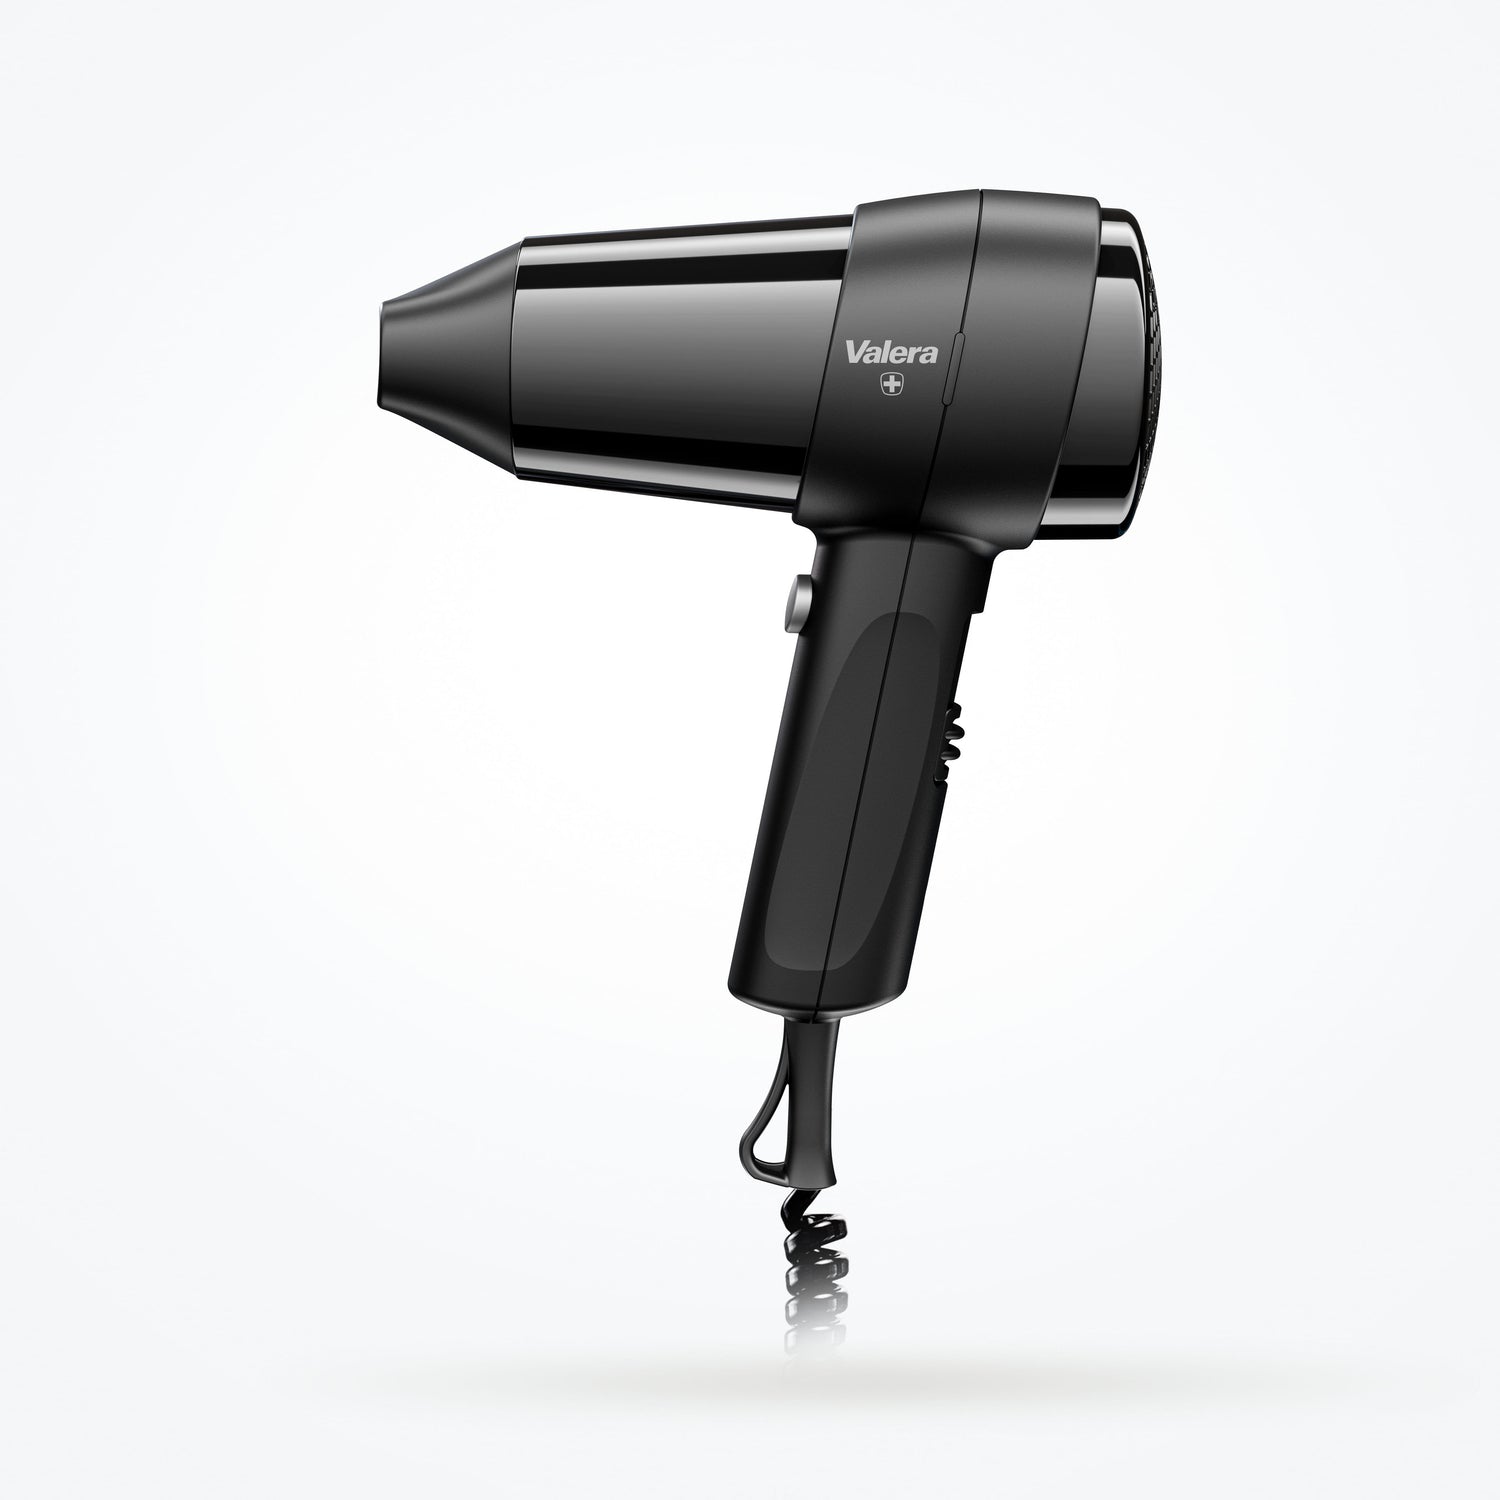 Action 1600 Push professional hairdryer